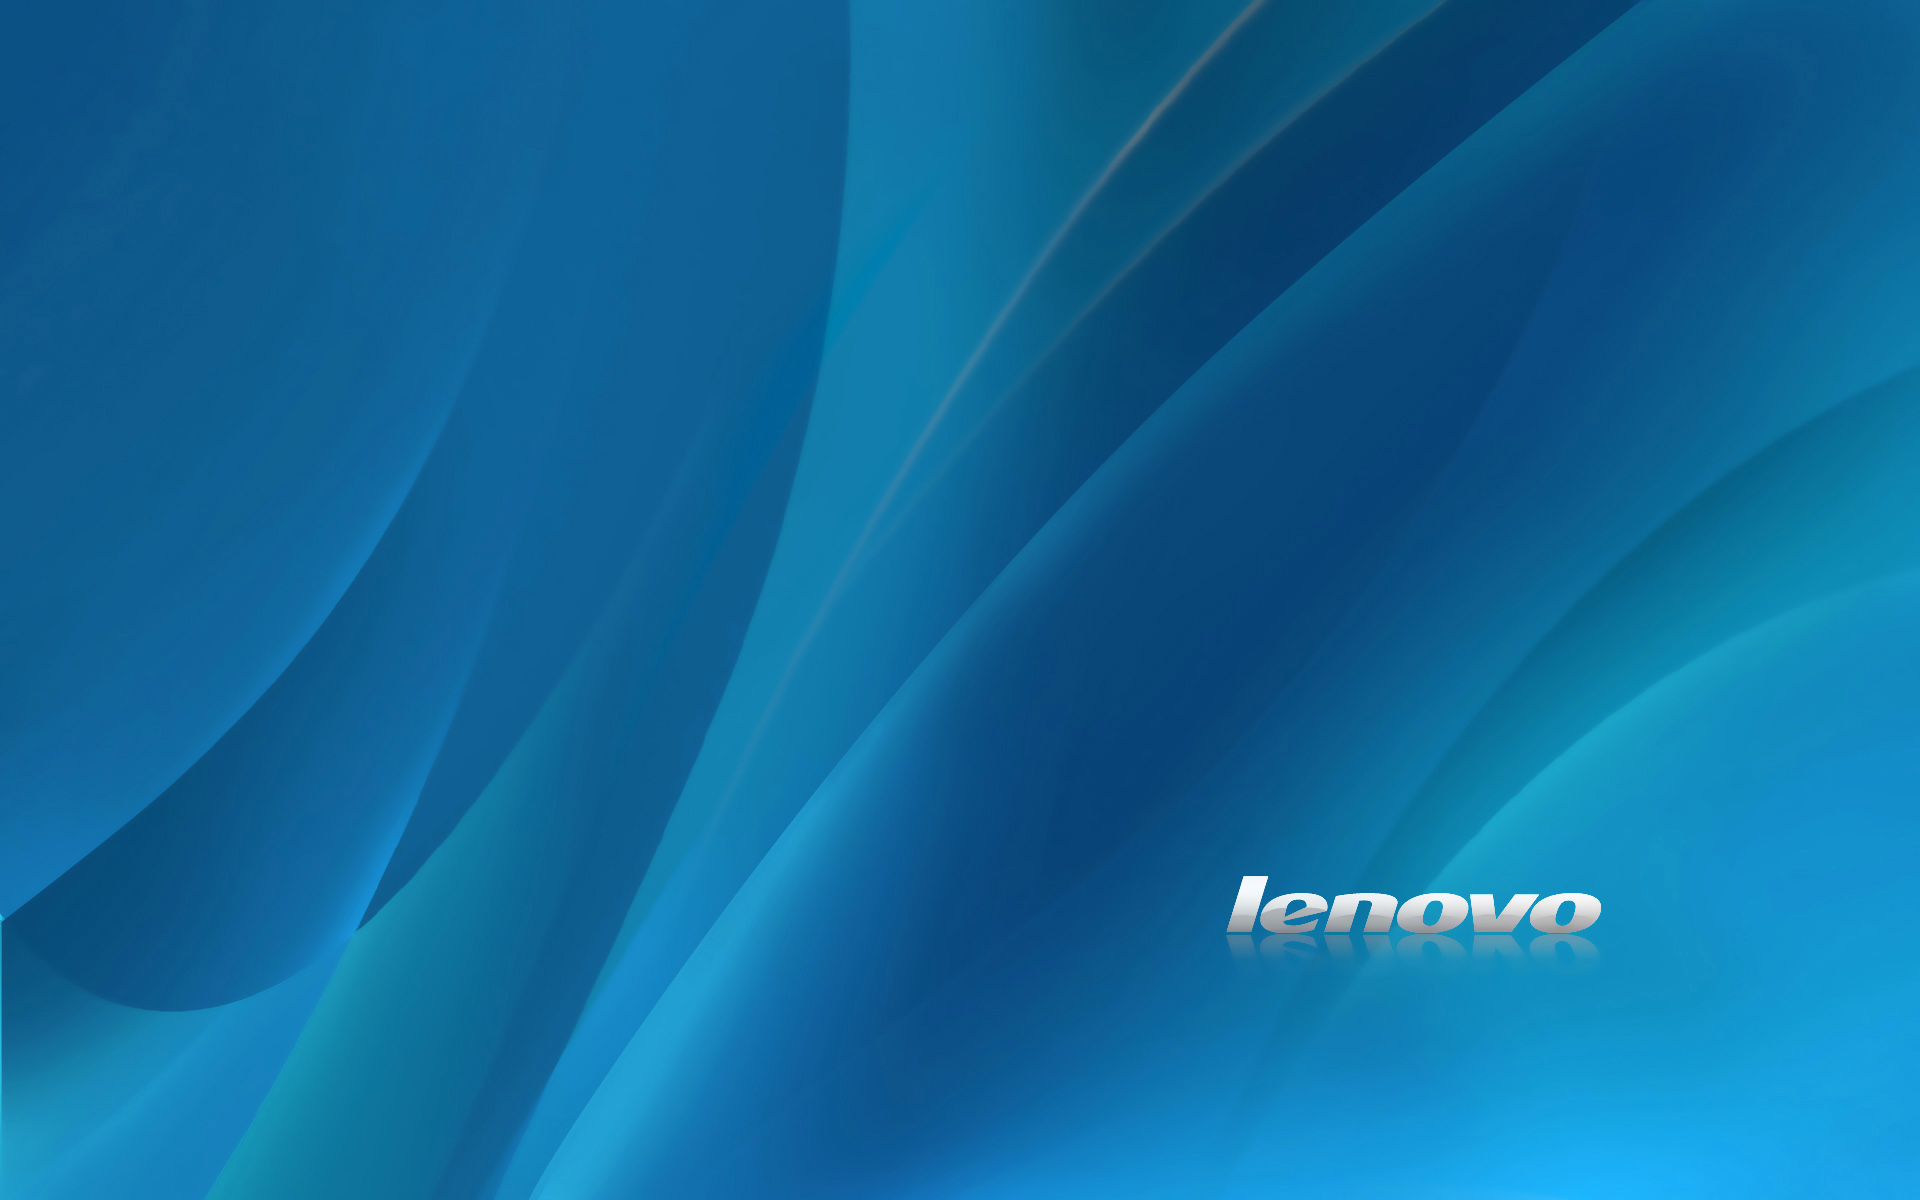 Lenovo Wallpapers Full HD Pictures